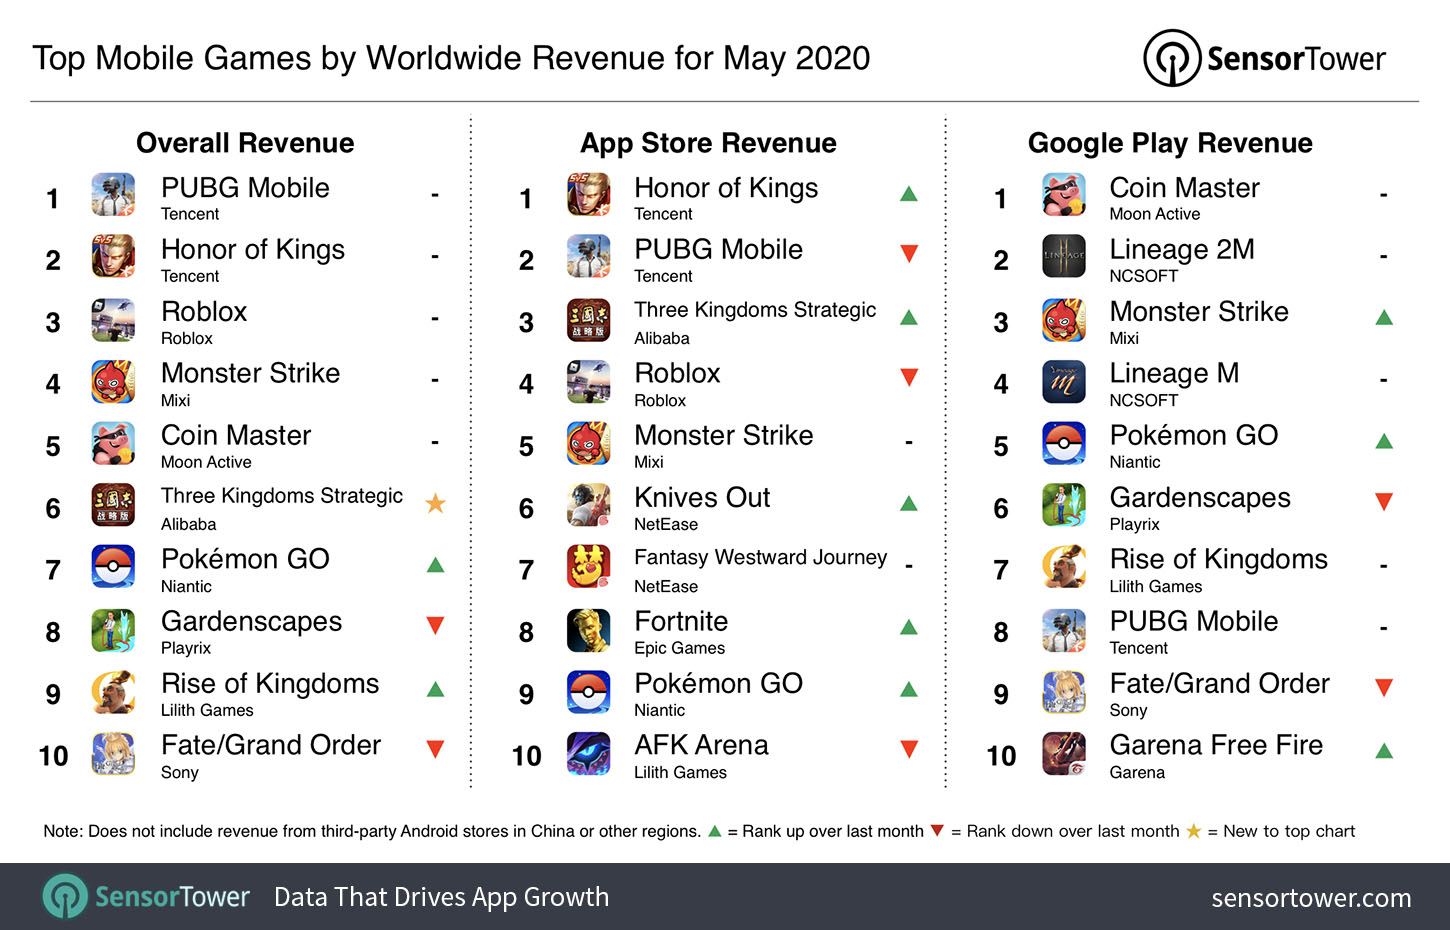 “Top Grossing Mobile Games Worldwide for May 2020